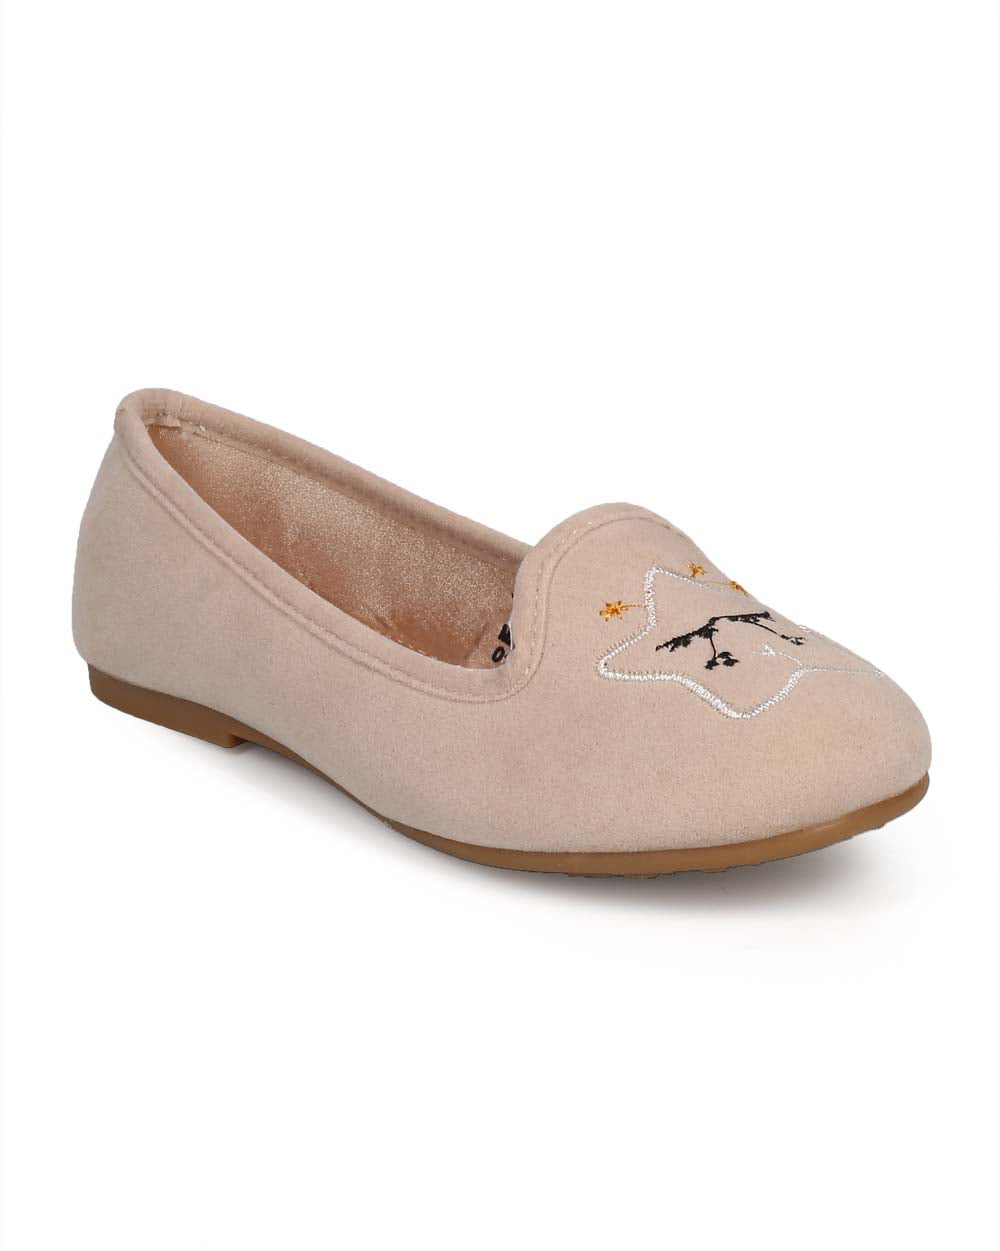 New Girl DI01 Same Suede Cloud Character Round Toe Albert Slip On Loafer 11-4